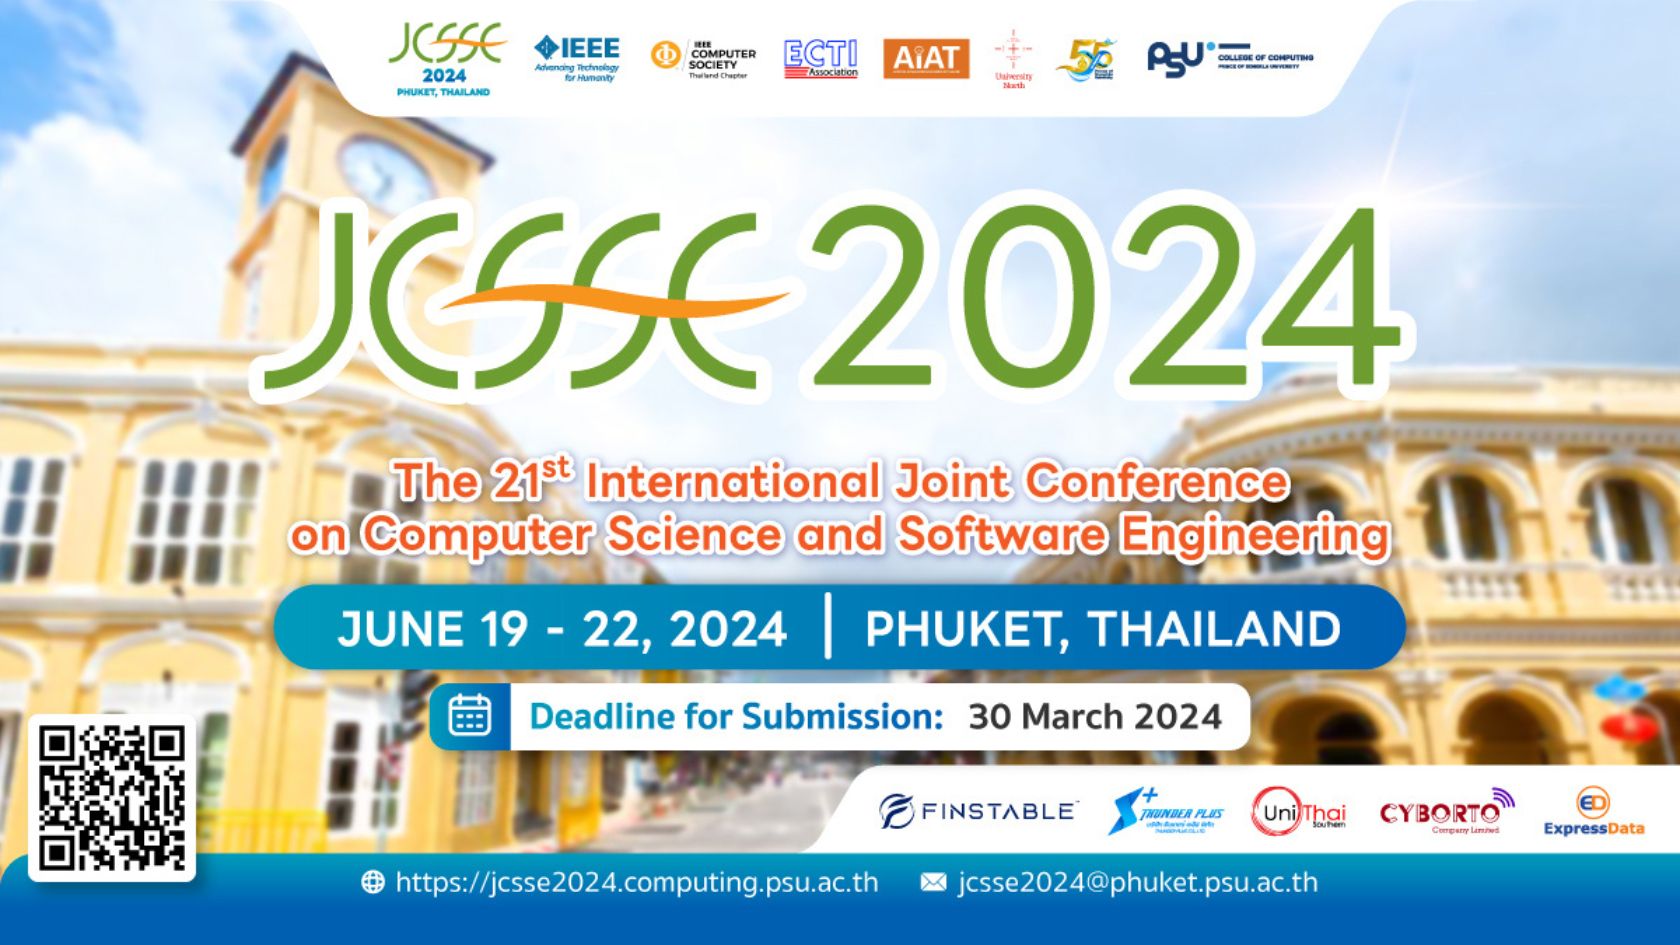 The 21st International Joint Conference on Computer Science and Software Engineering (JCSSE 2024) at Phuket, Thailand